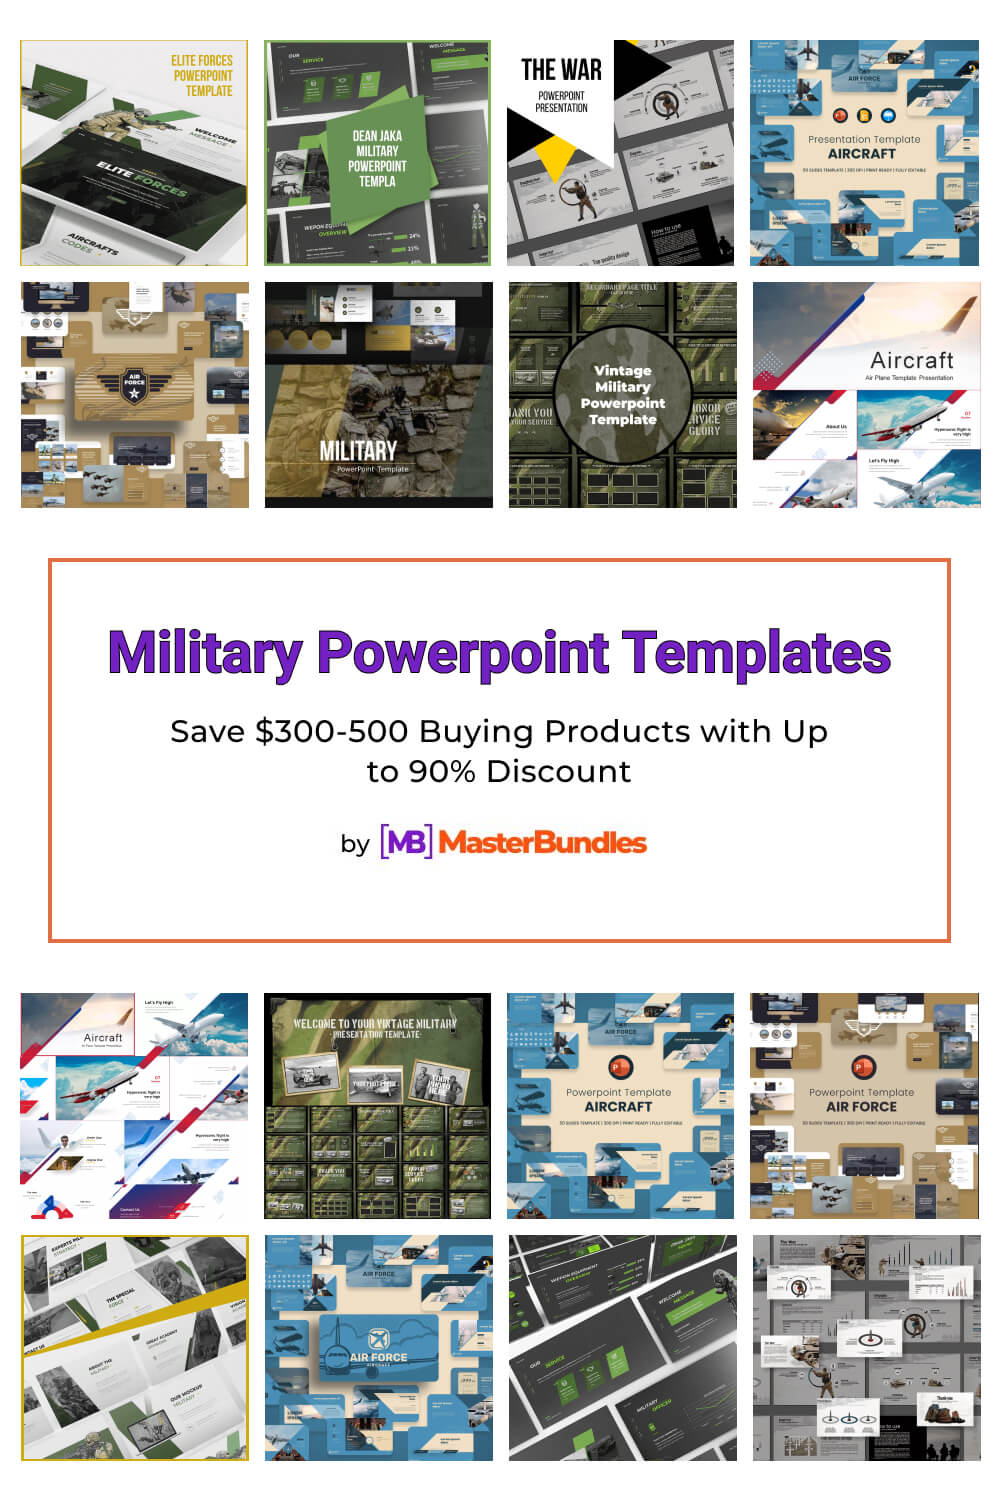 military powerpoint templates pinterest image.